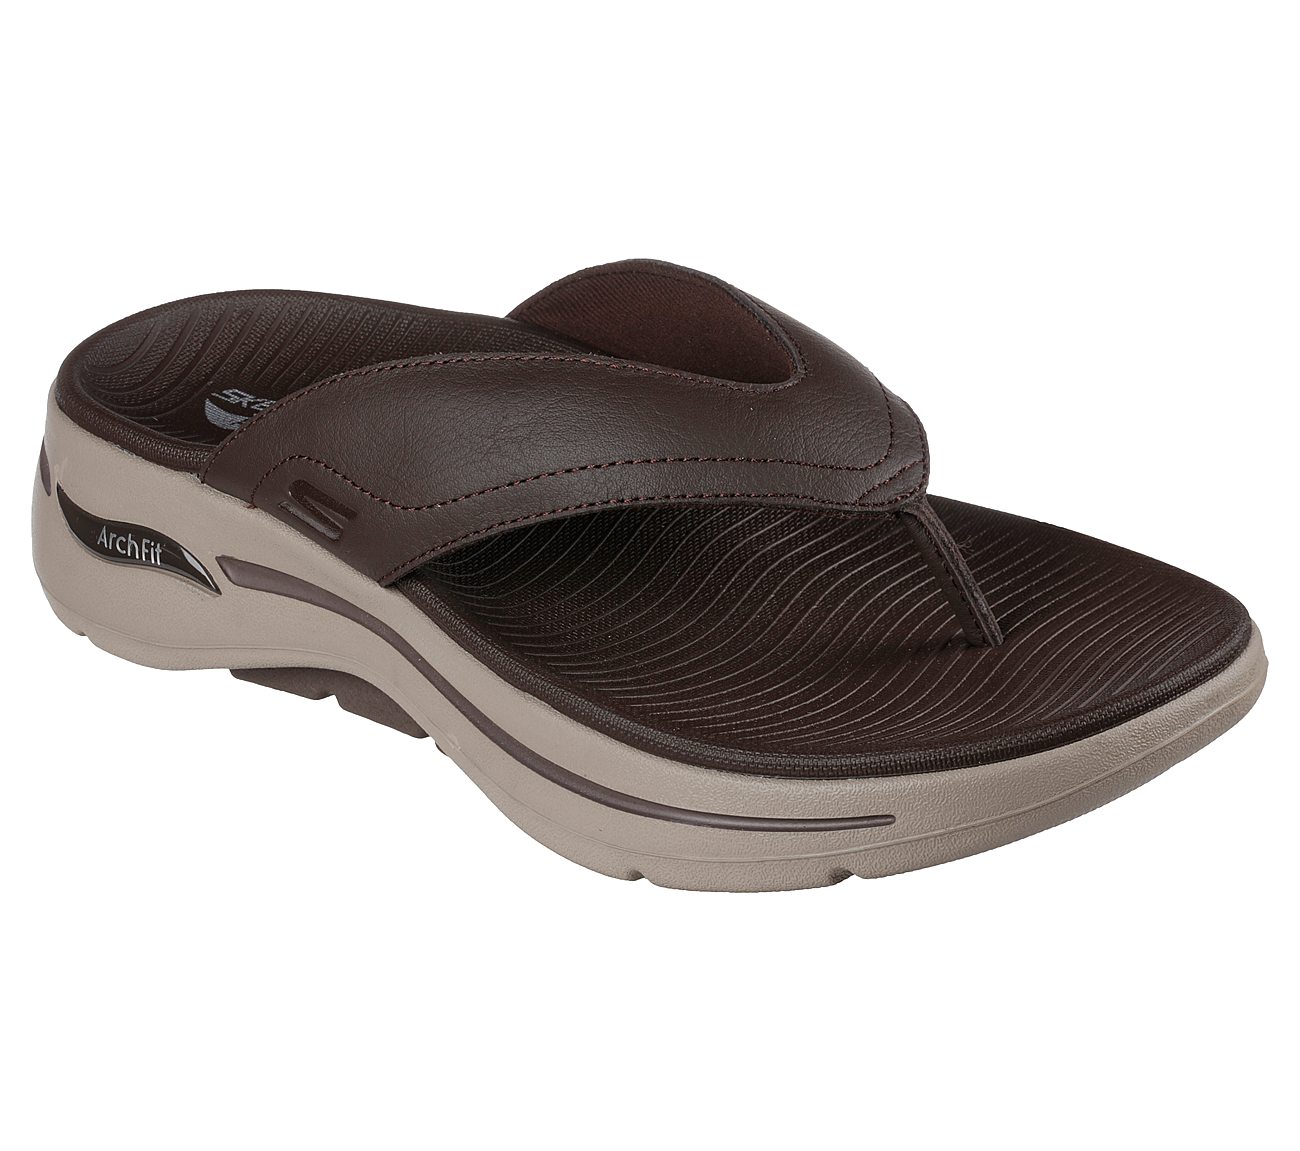 GO WALK ARCH FIT SANDAL, BROWN Footwear Lateral View